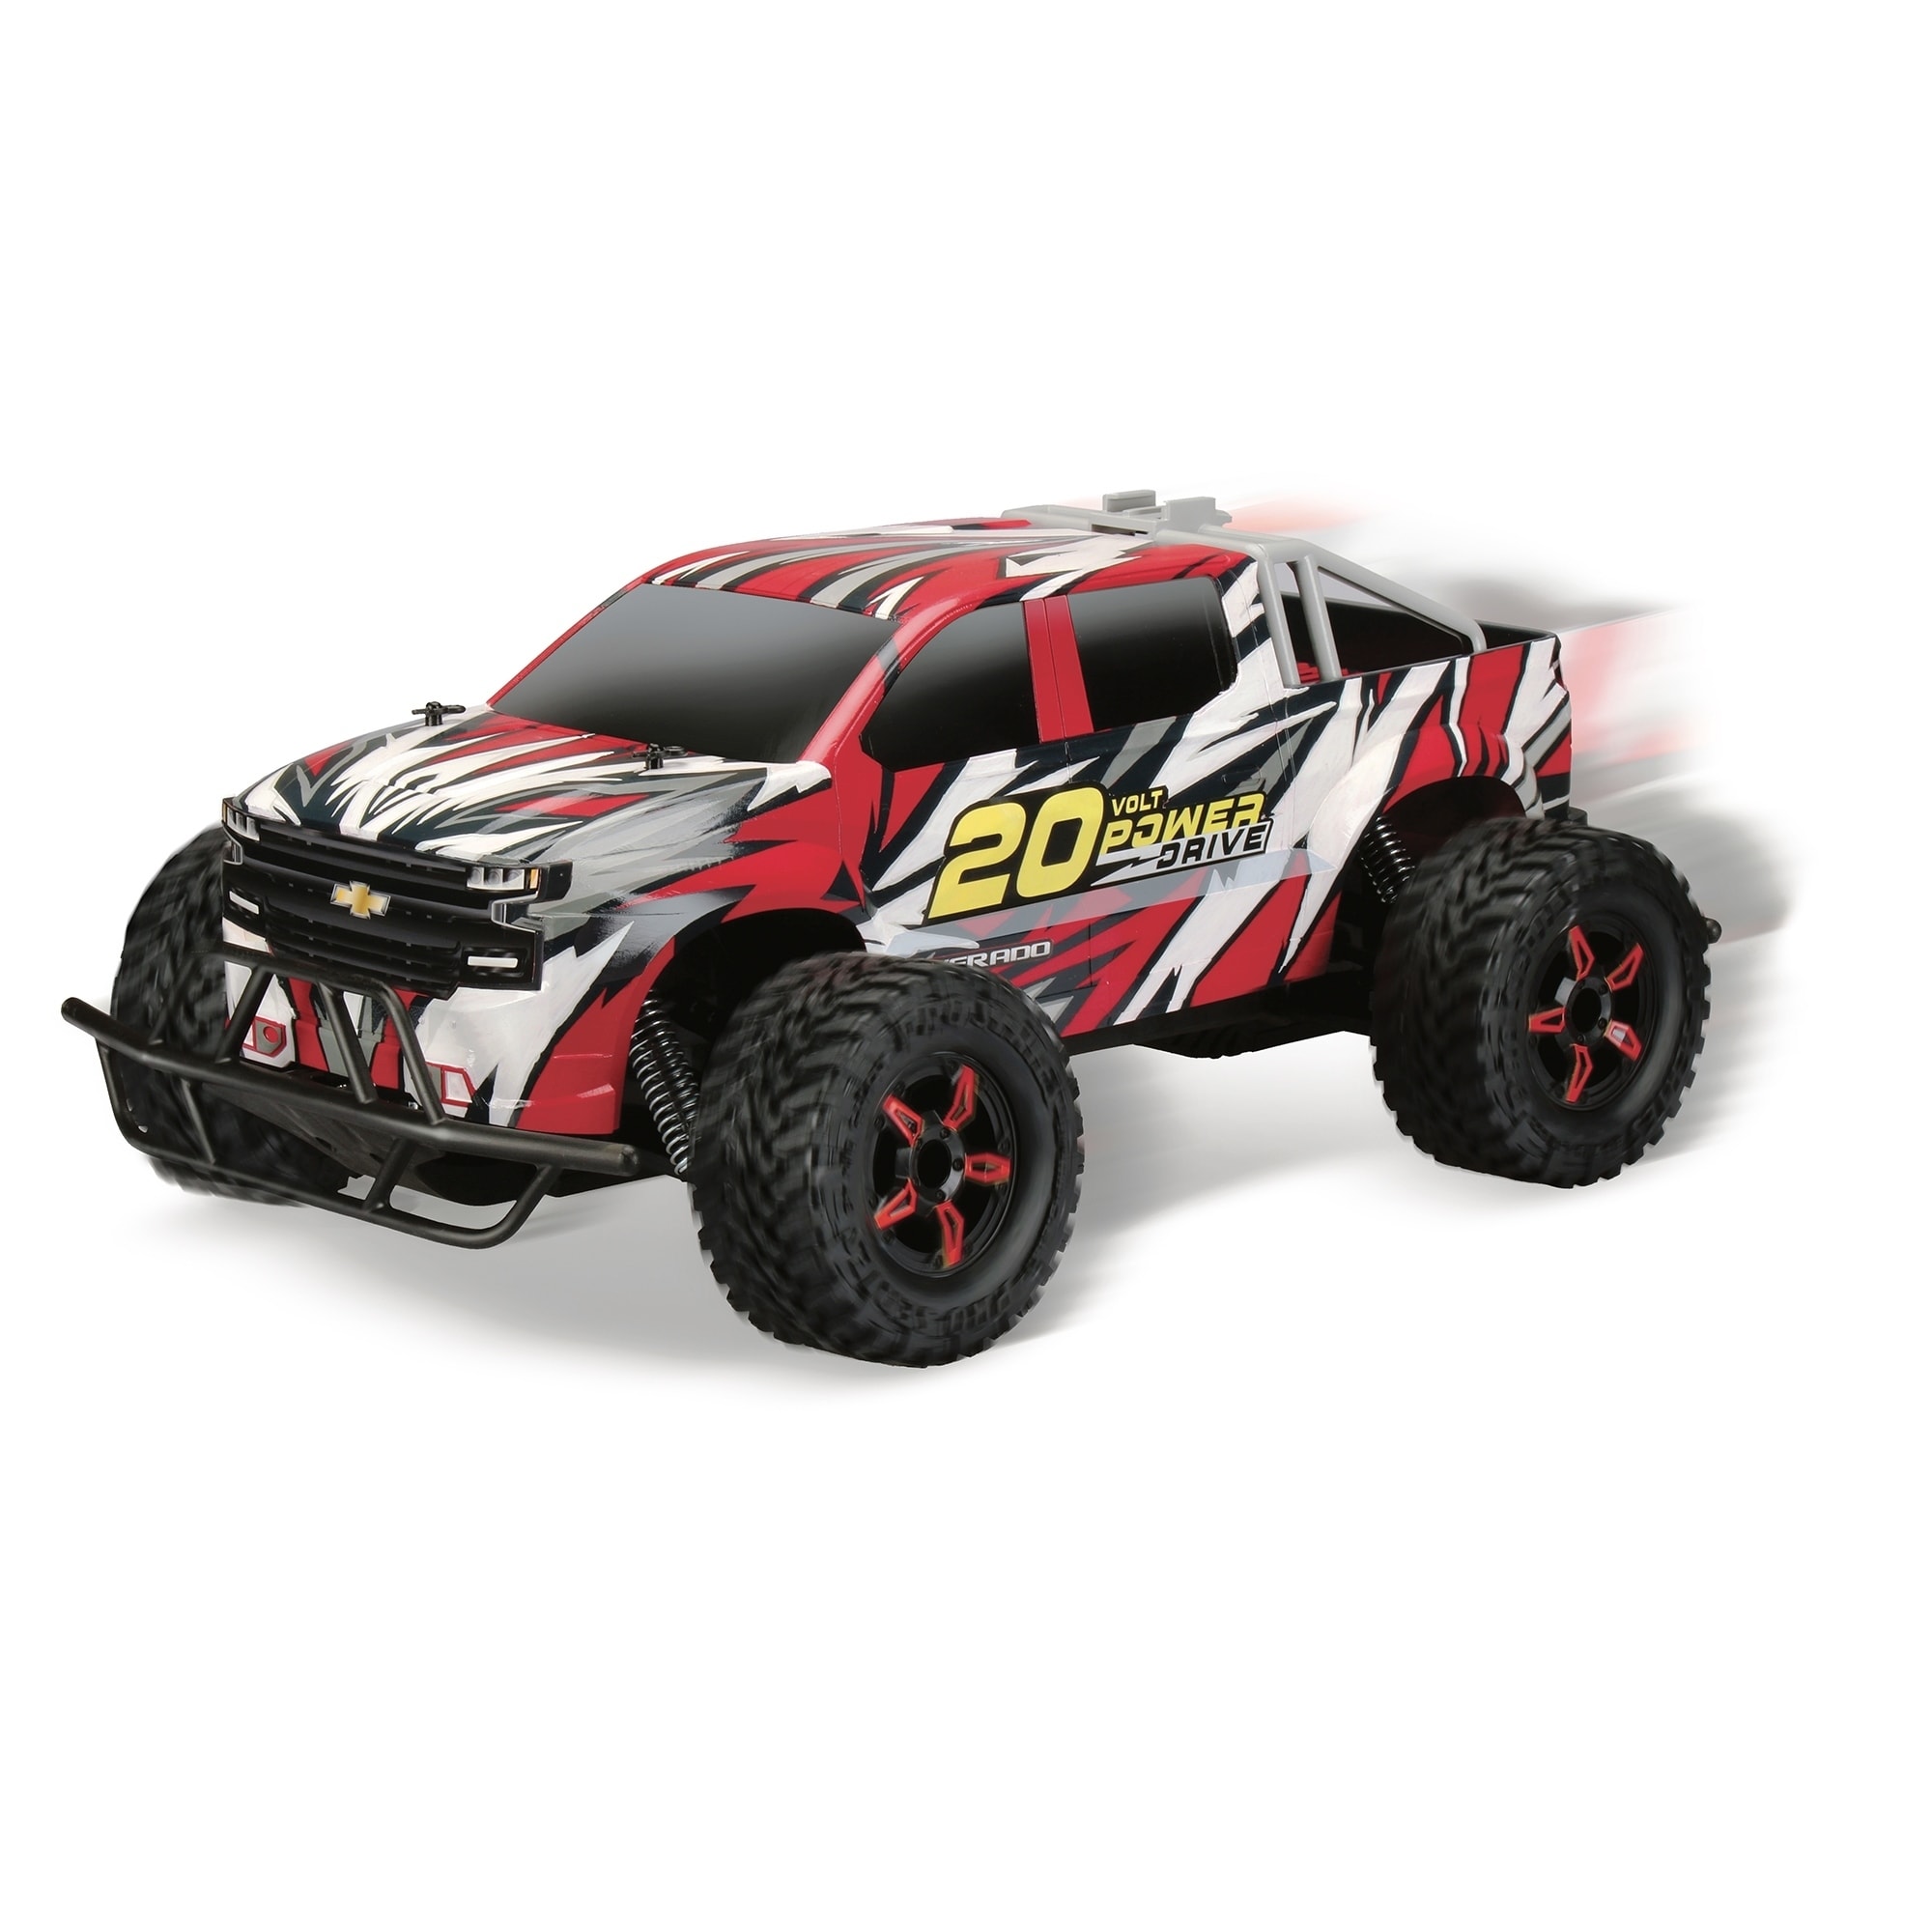 power remote control cars